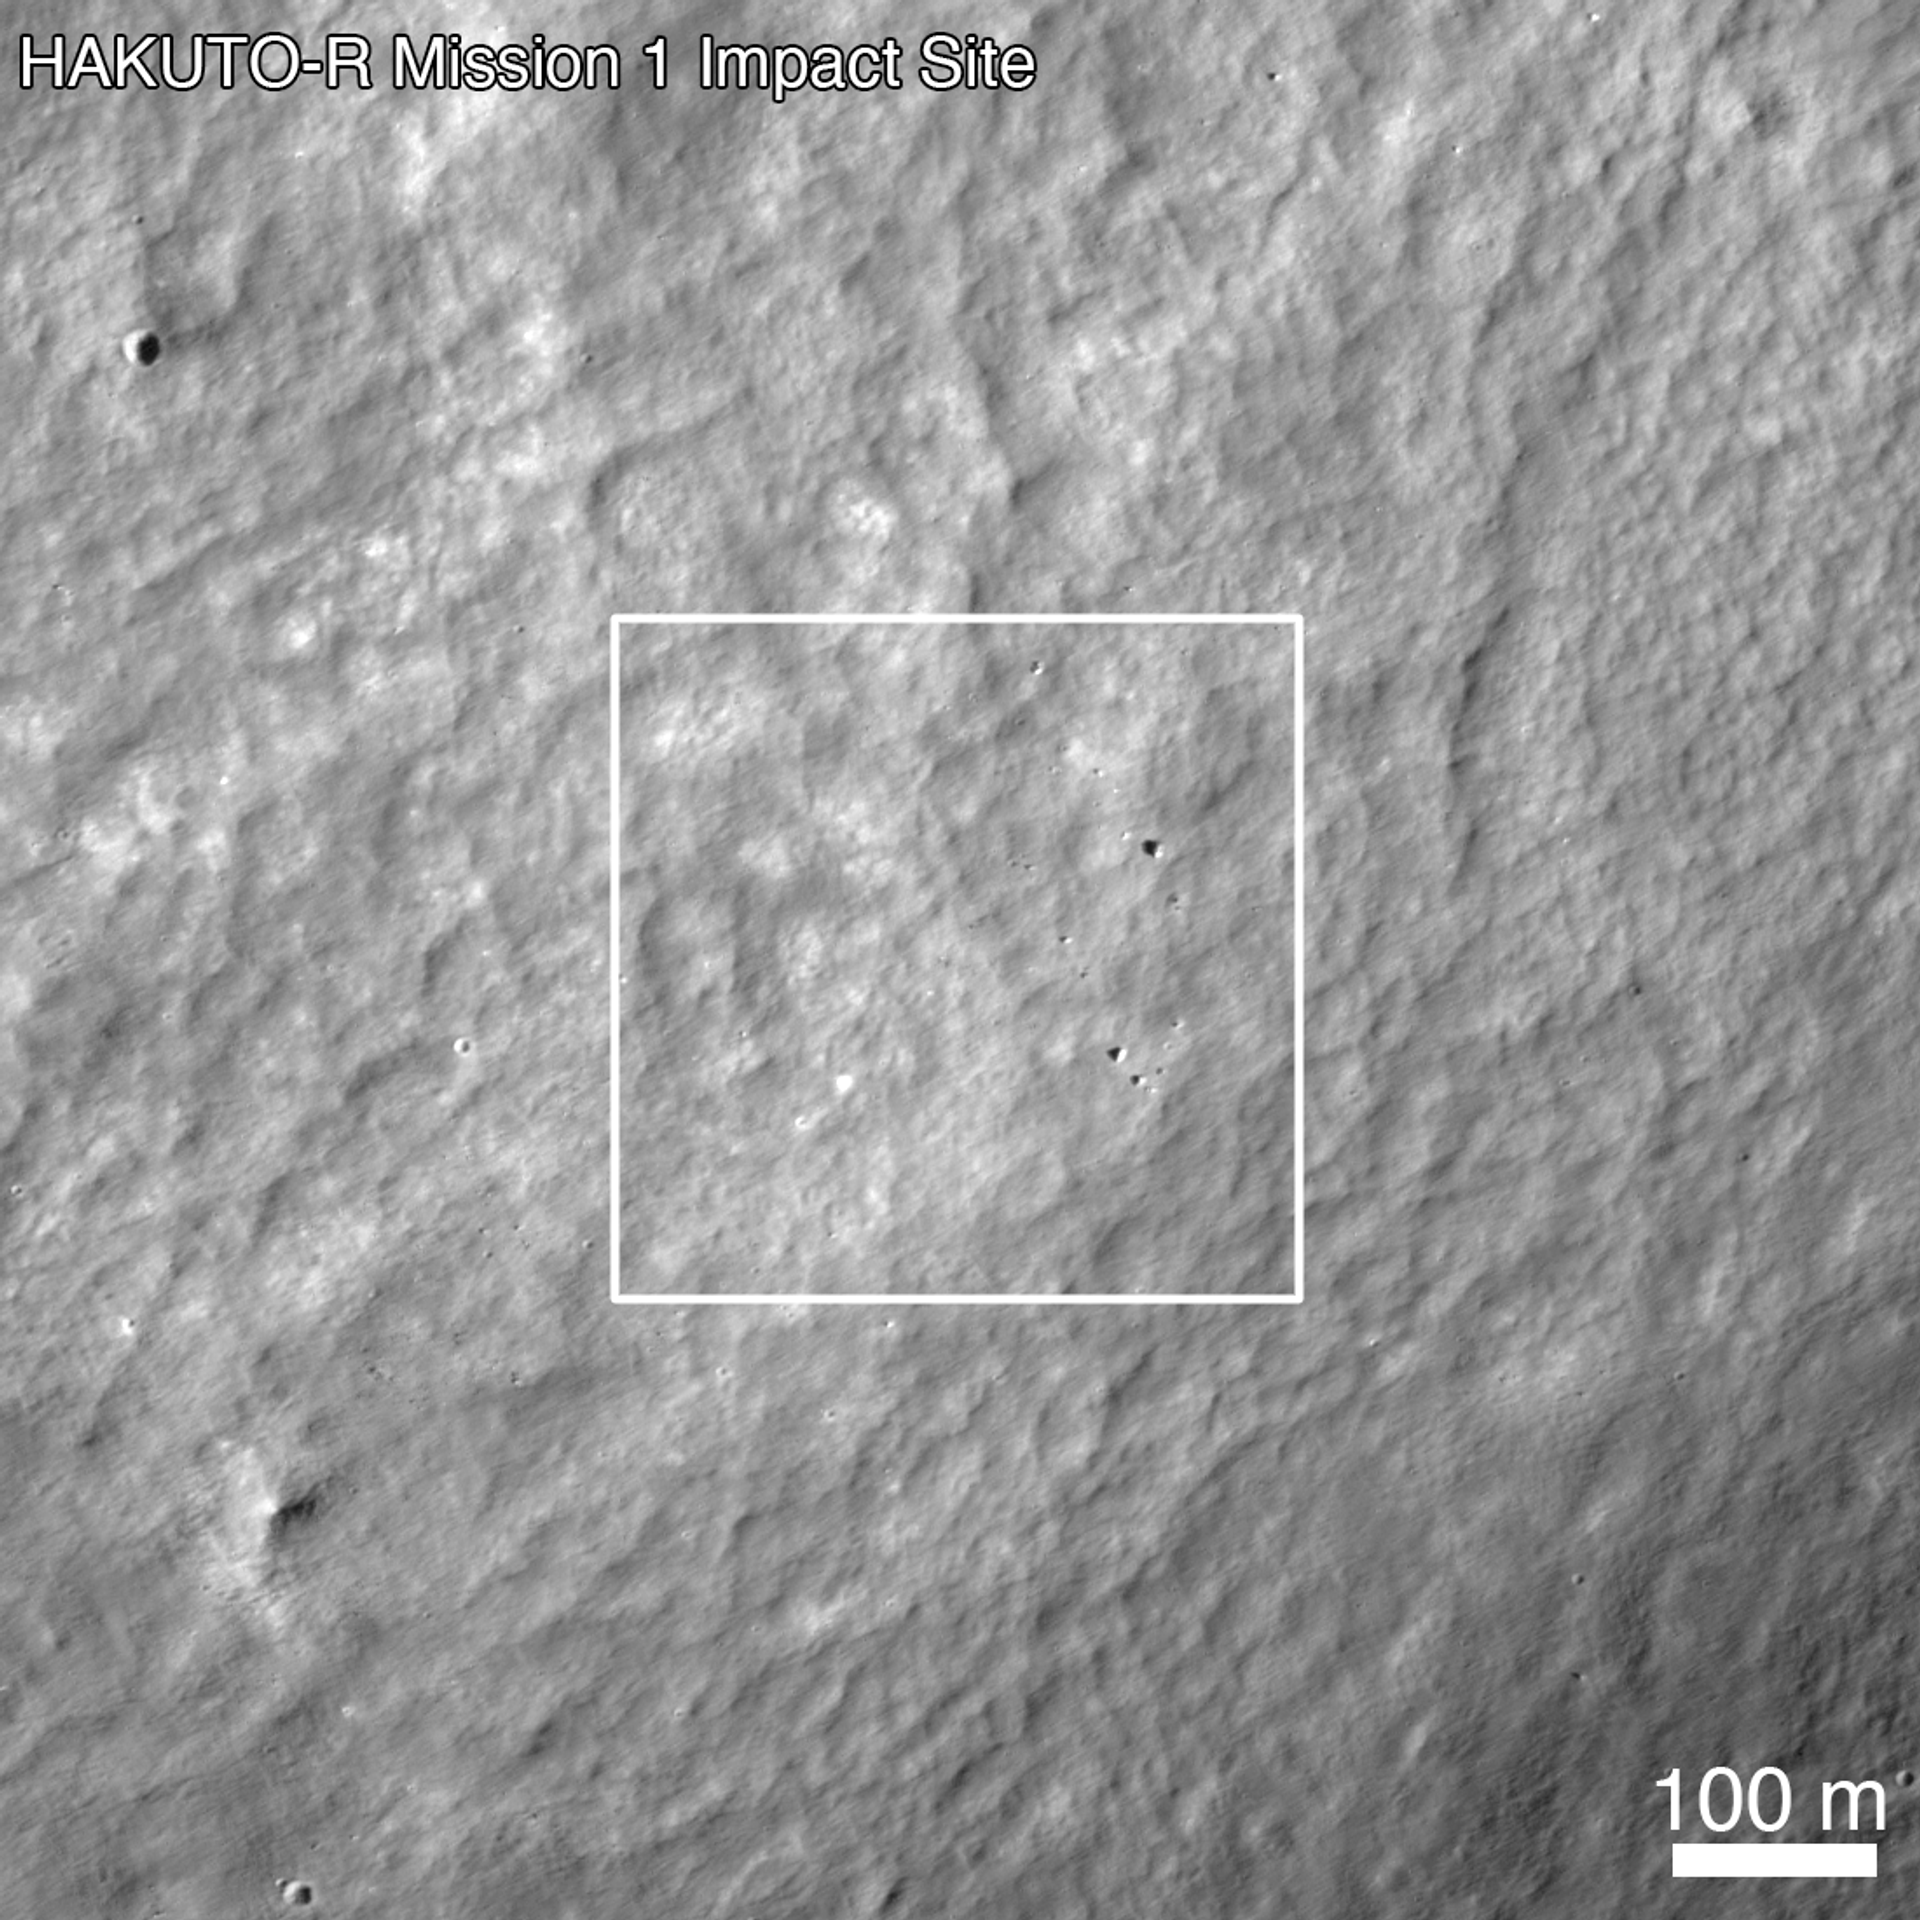 HAKUTO-R Mission 1 lunar lander site, as seen by the Lunar Reconnaissance Orbiter Camera (LROC) on April 26, 2023, the day after the attempted landing. The scale bar is 100 m across. - Sputnik International, 1920, 27.05.2023